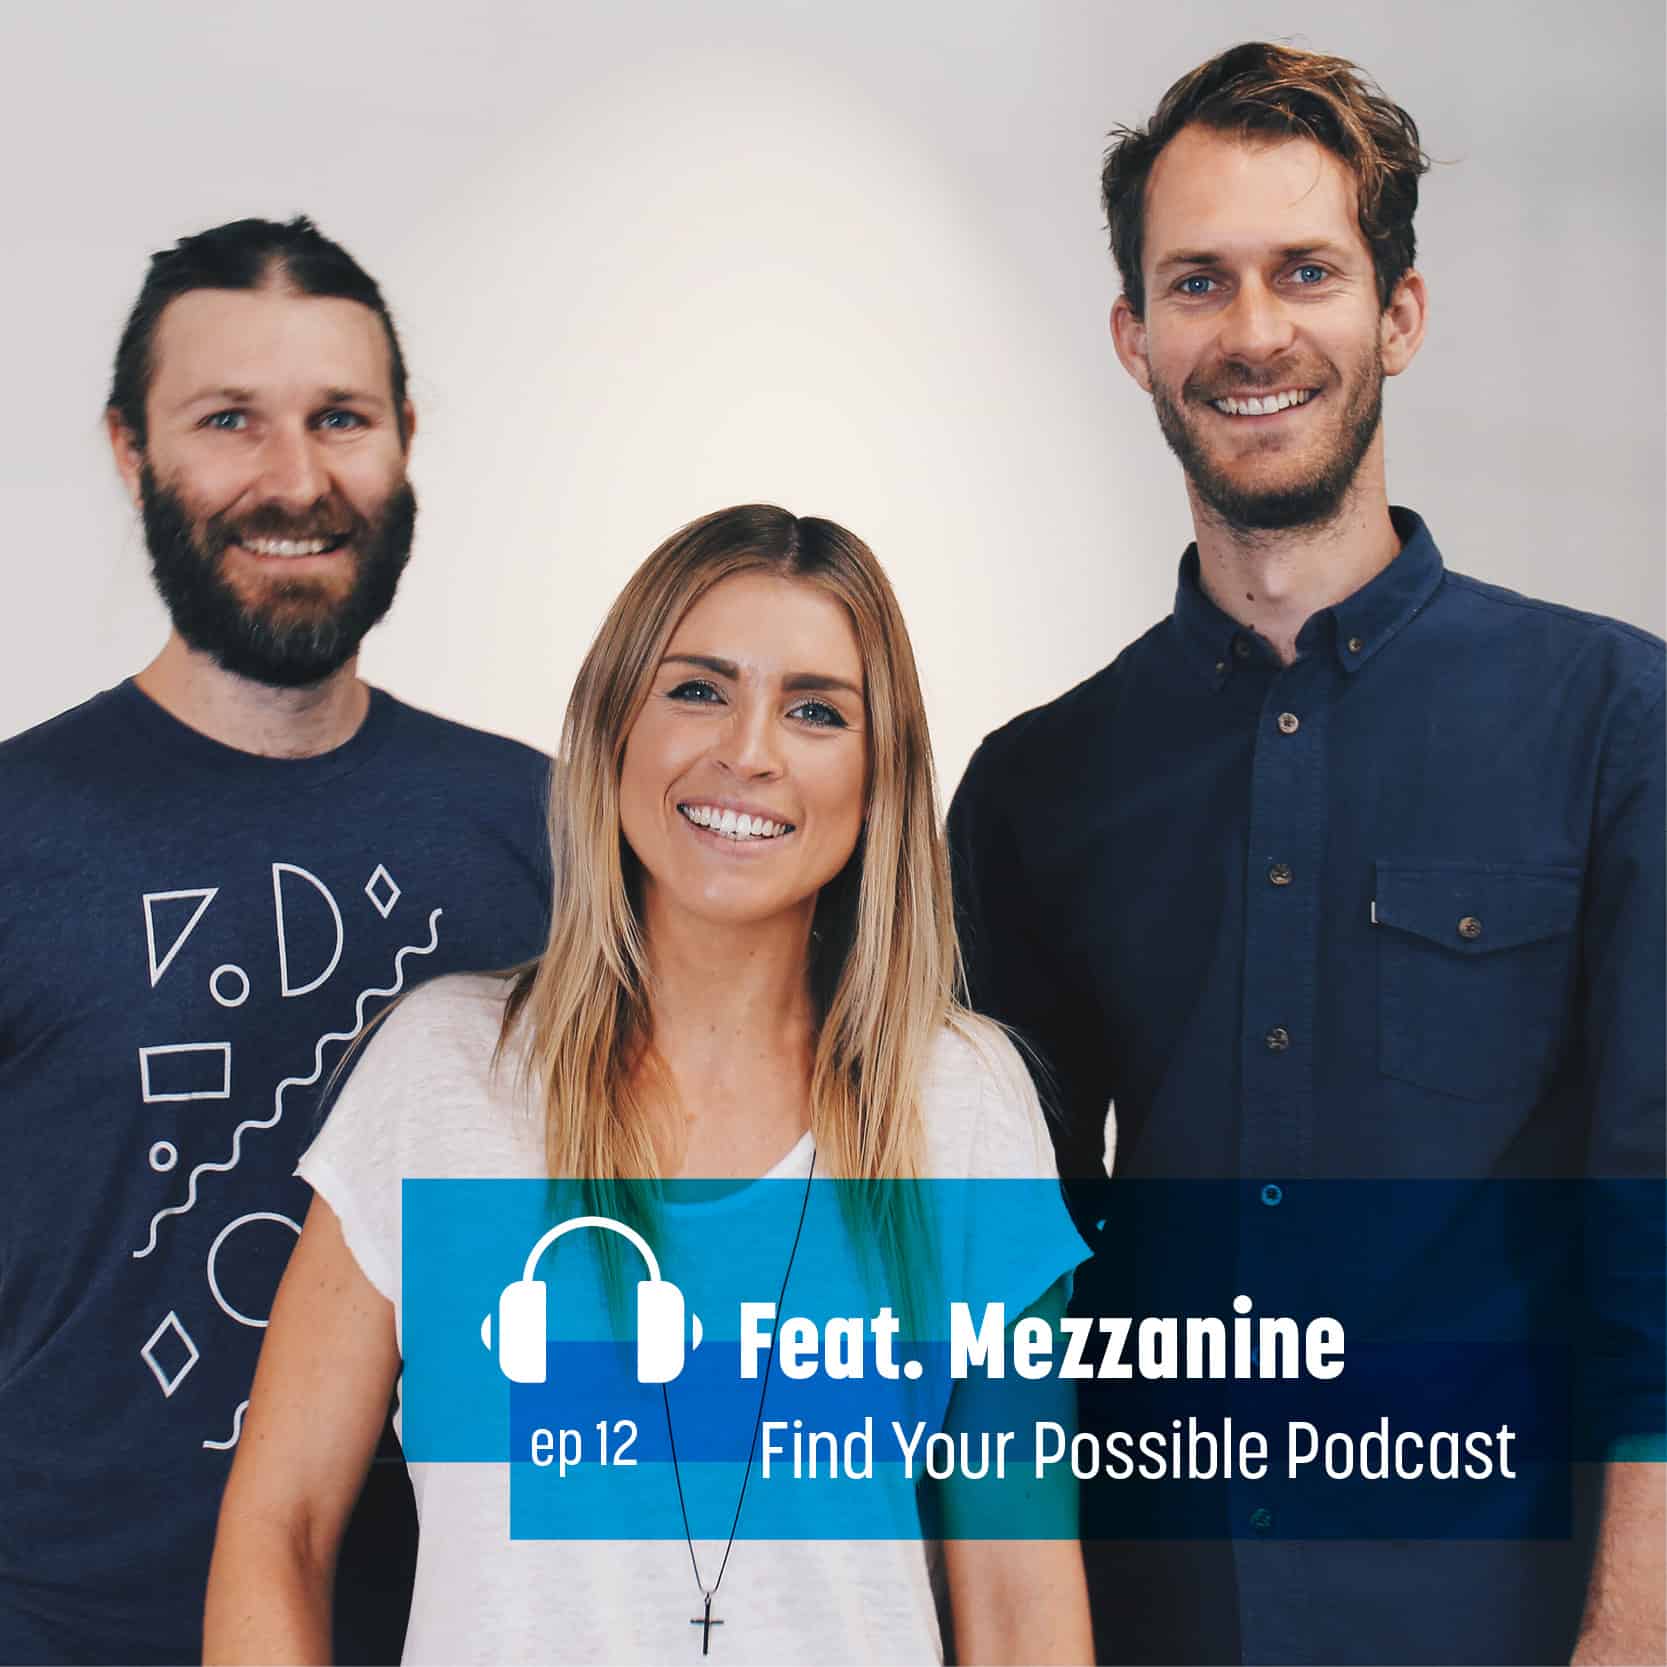 Luke Burrell, Nikki Wright, Shane Burrell, Mezzanine Find Your Possible Podcast Ep12, Conscious Brands